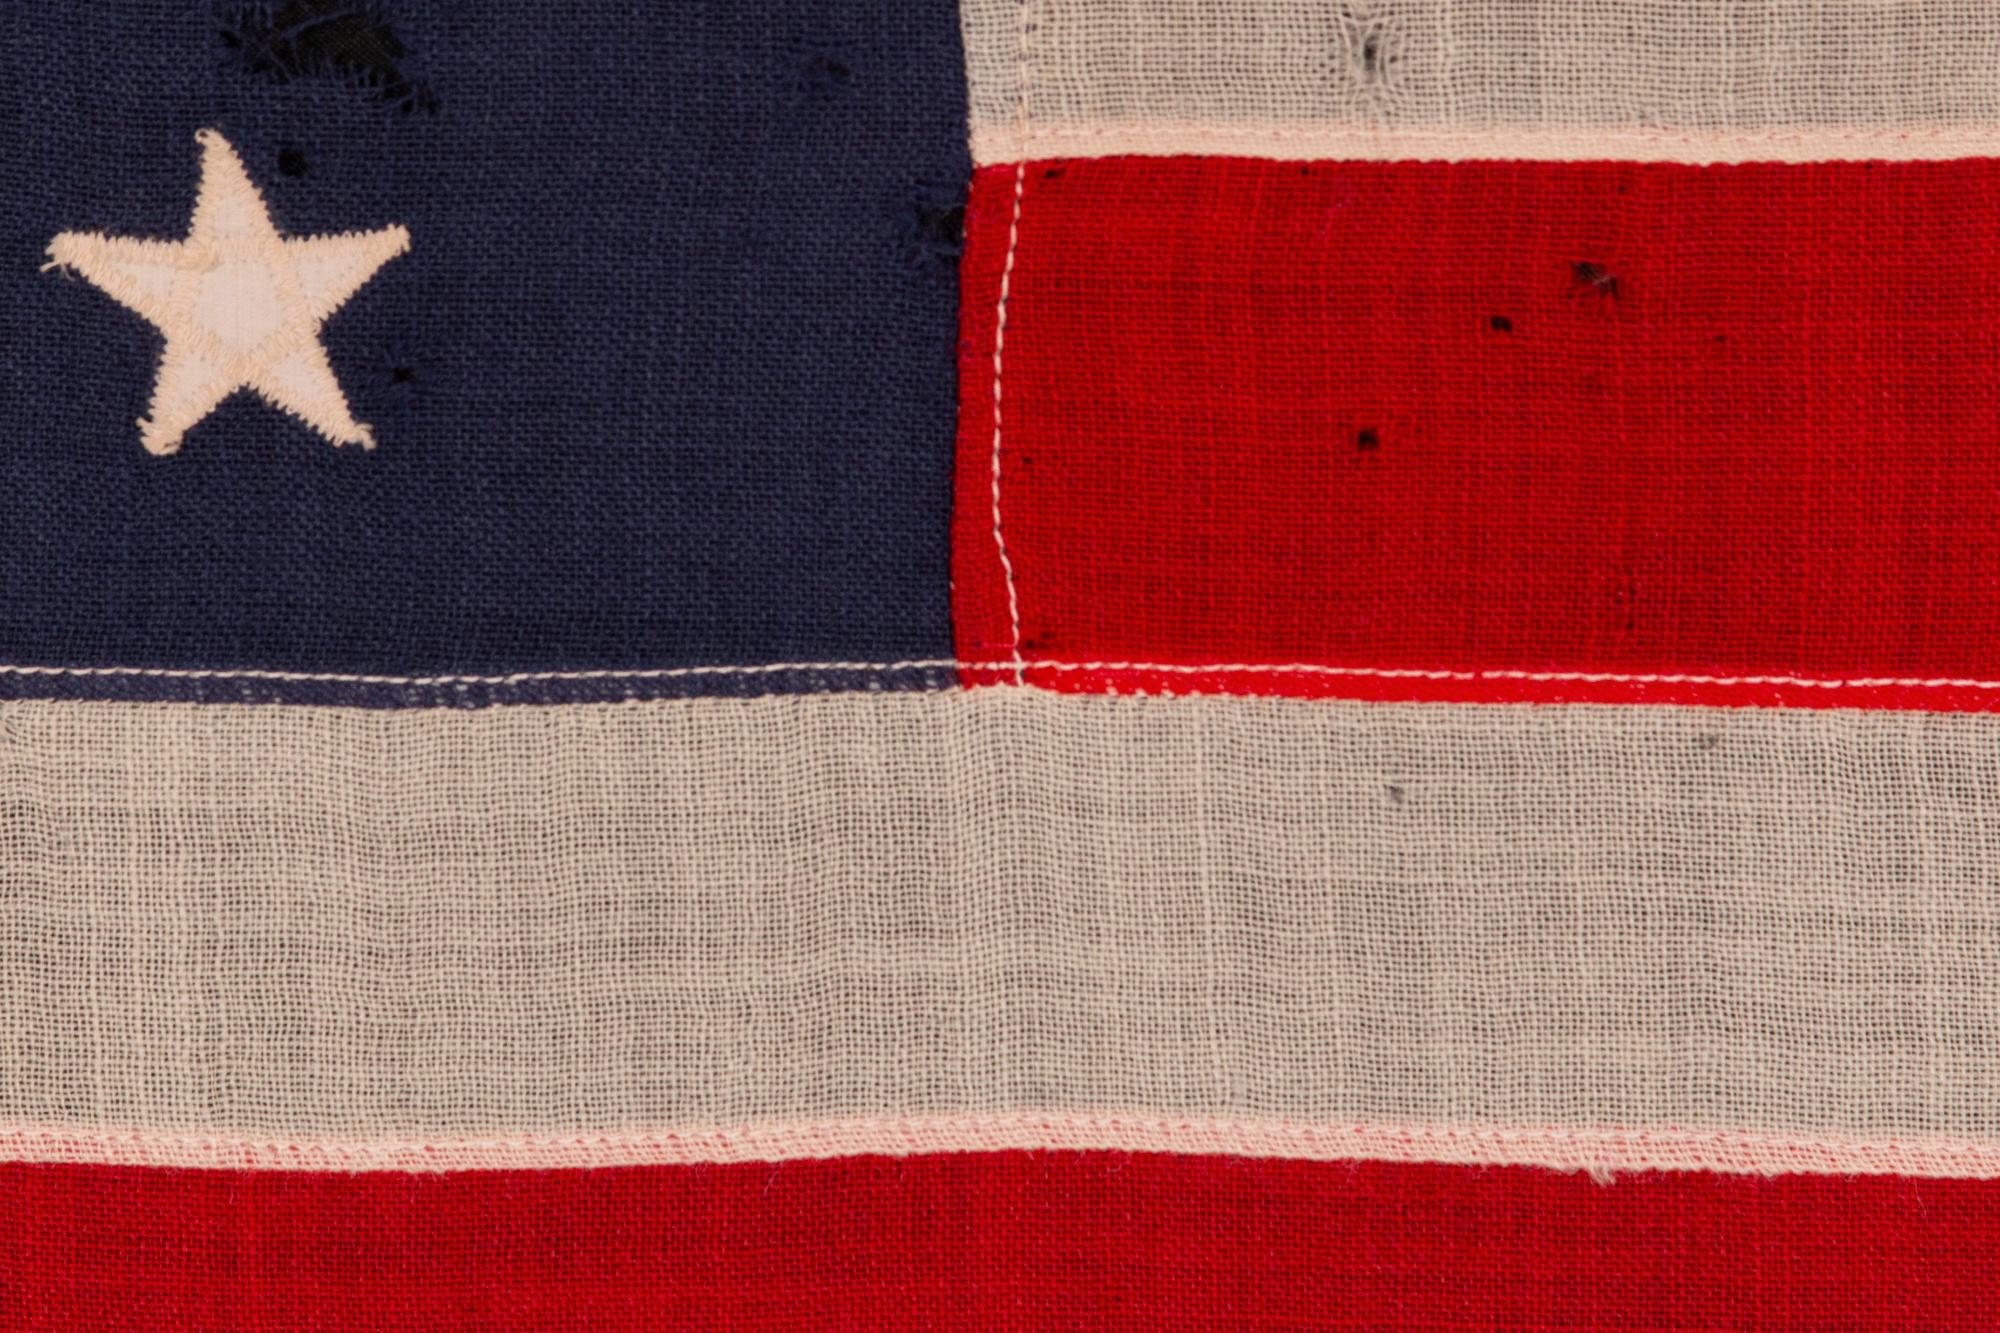 20th Century 46 Star Antiques American Flag, Small Scale, Oklahoma Statehood, Ca 1907-1912 For Sale